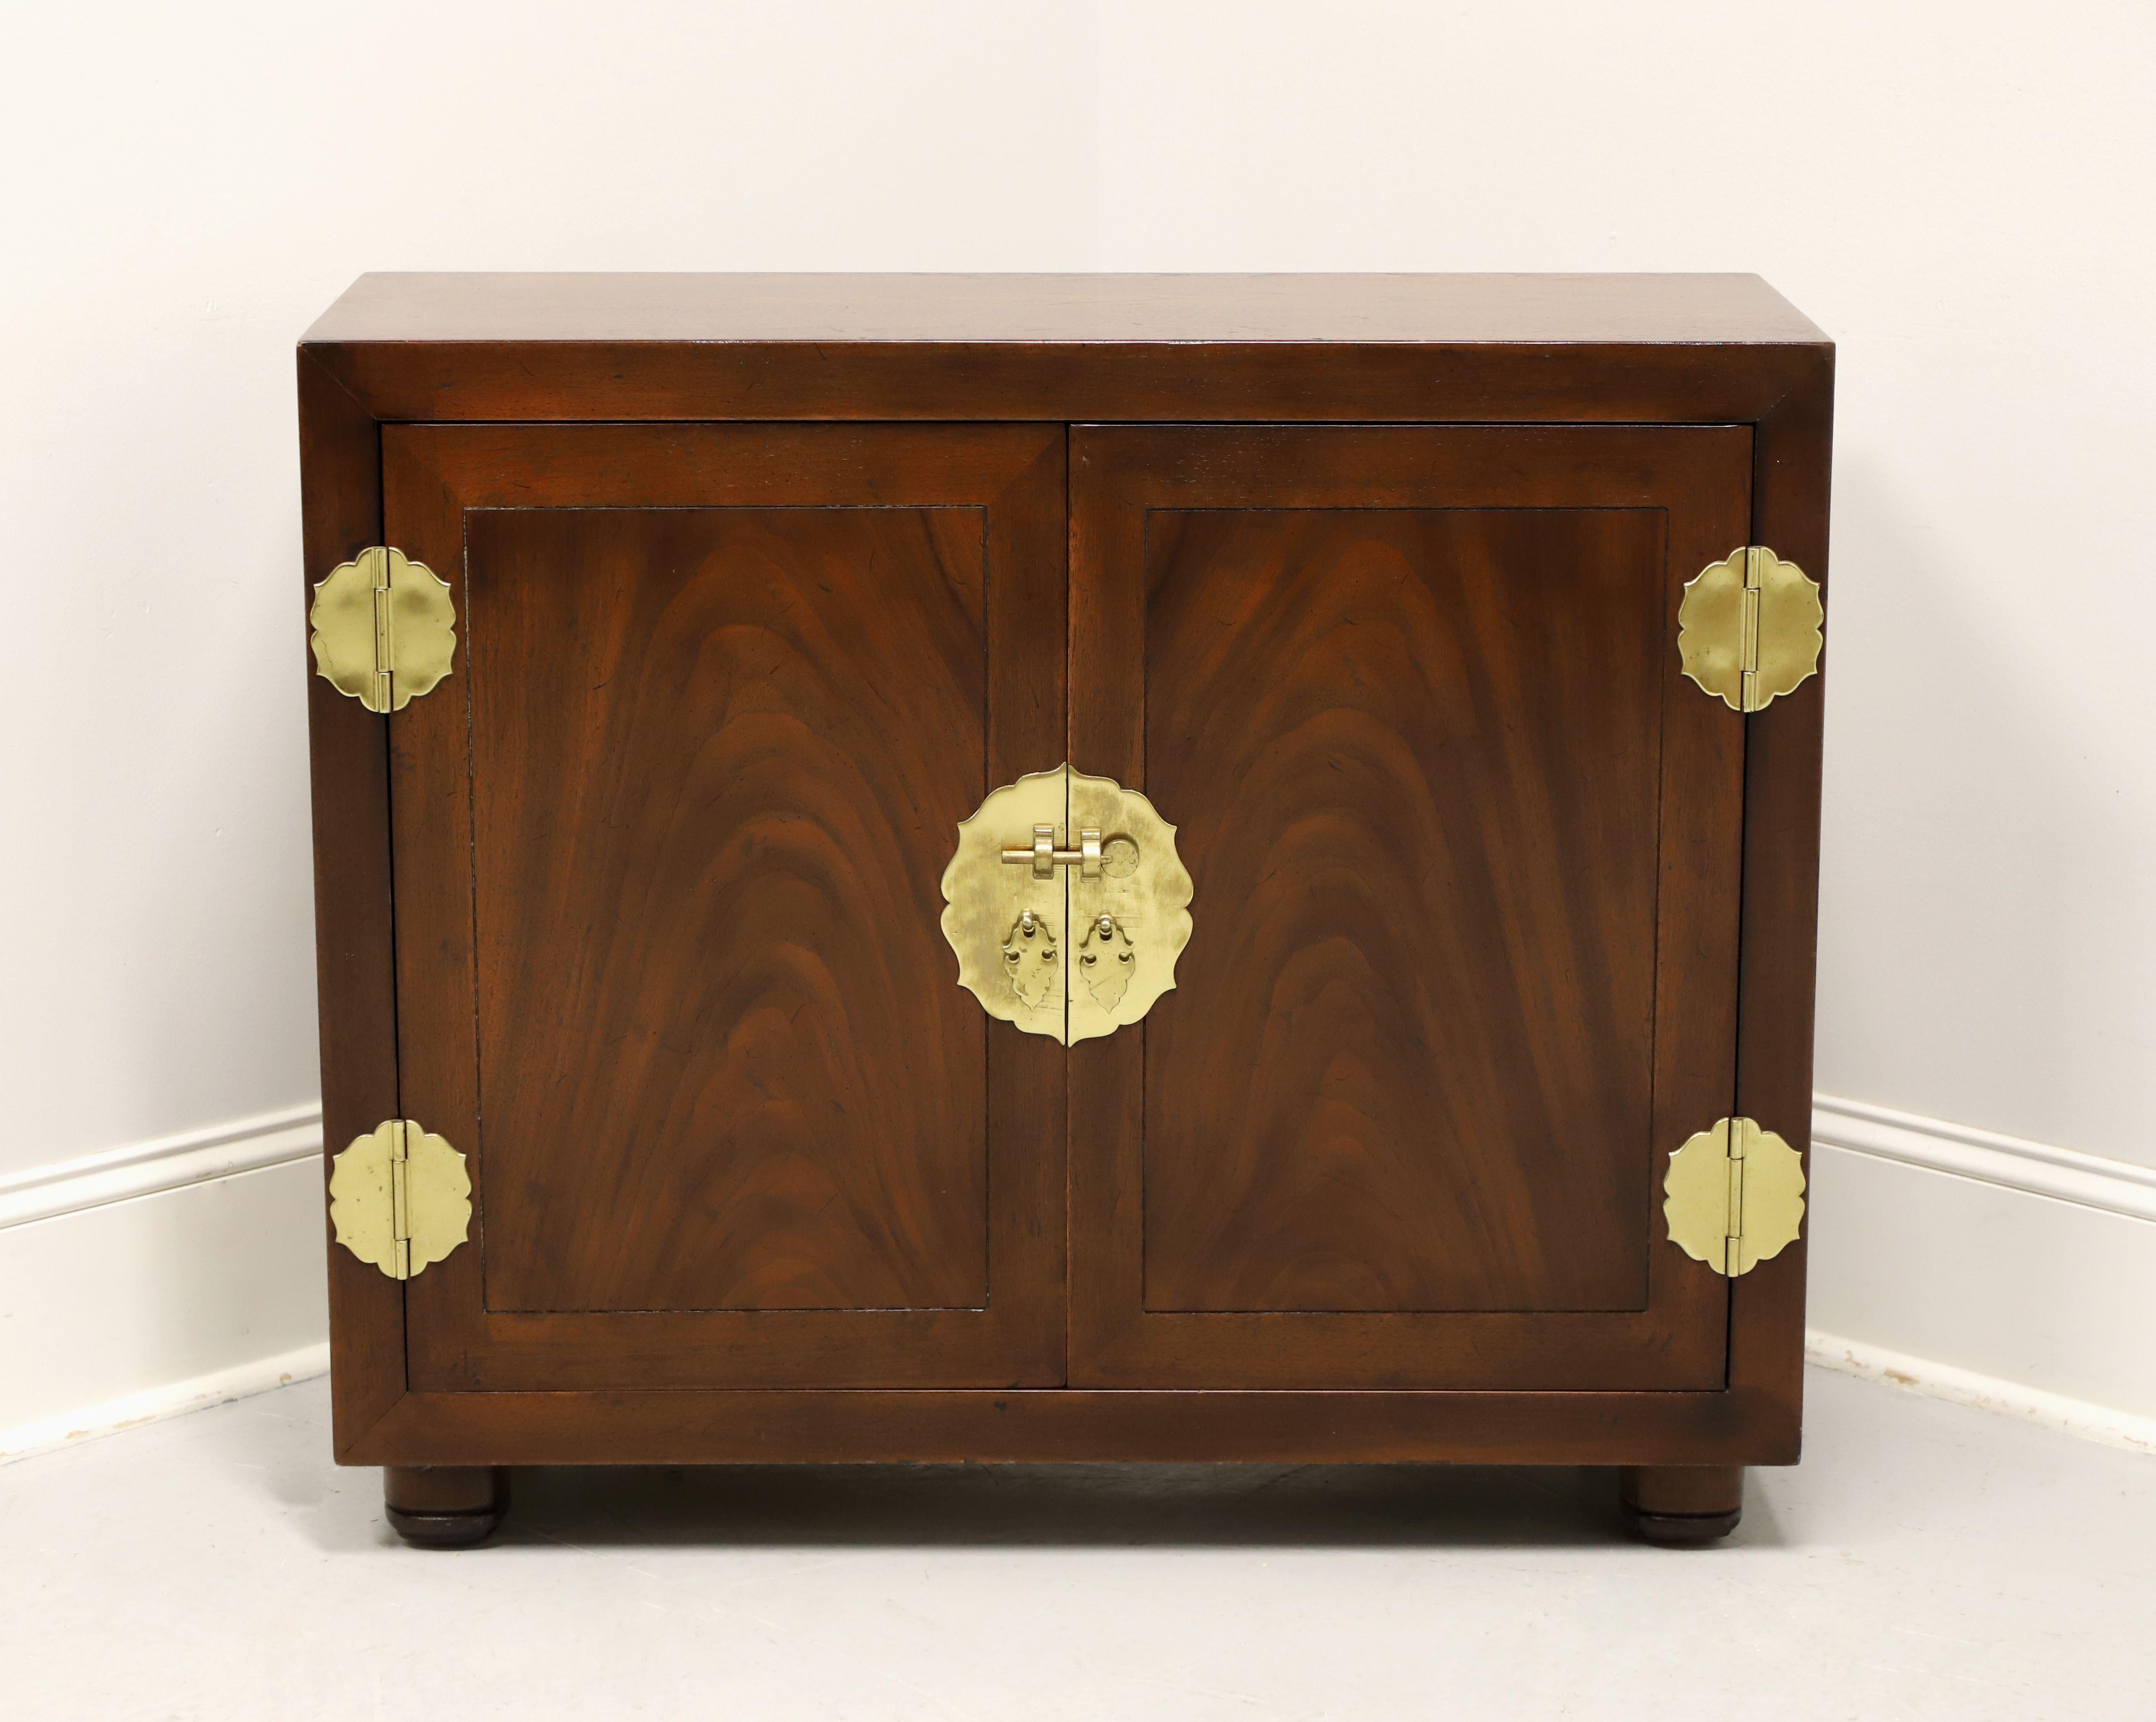 A console cabinet in the Japanese Tansu Campaign style by Henredon. Mahogany with smooth surface top, brass hardware & accents, inset flame mahogany to doors, and bun feet. Features two doors revealing interior storage with one adjustable wood